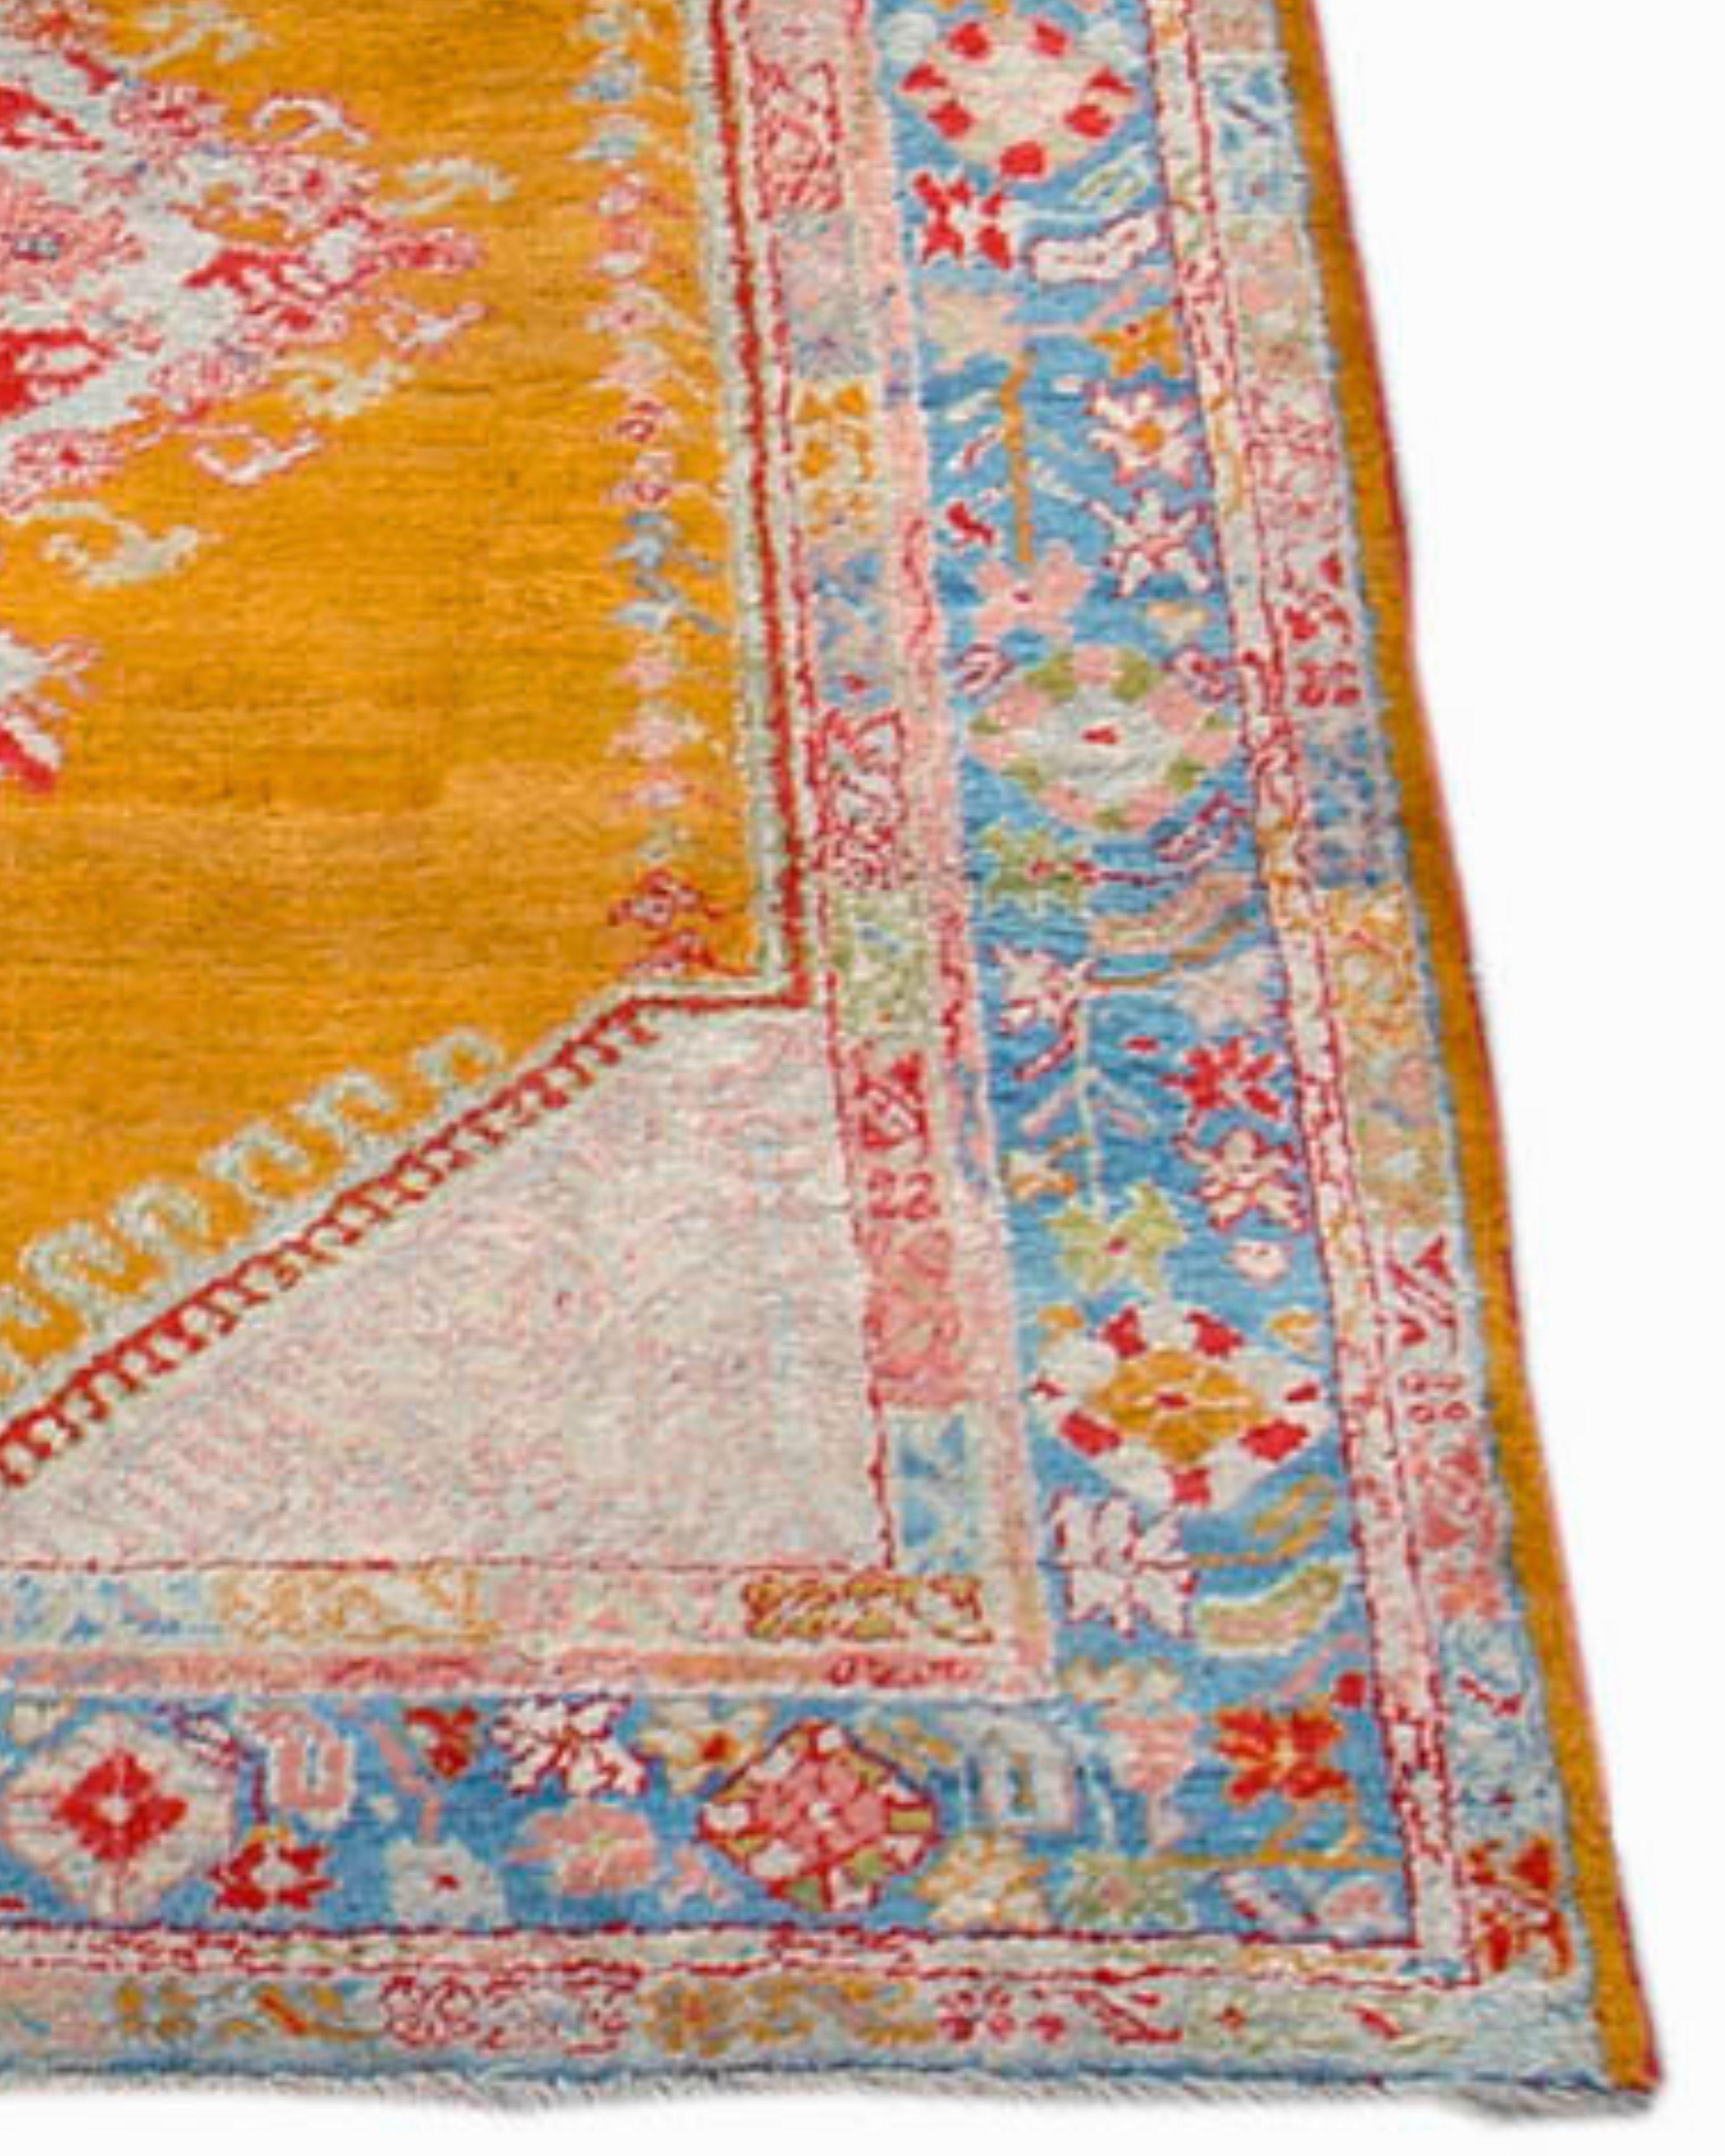 Antique Angora Oushak Rug with Saffron Yellow Field, Late 19th Century For Sale 1